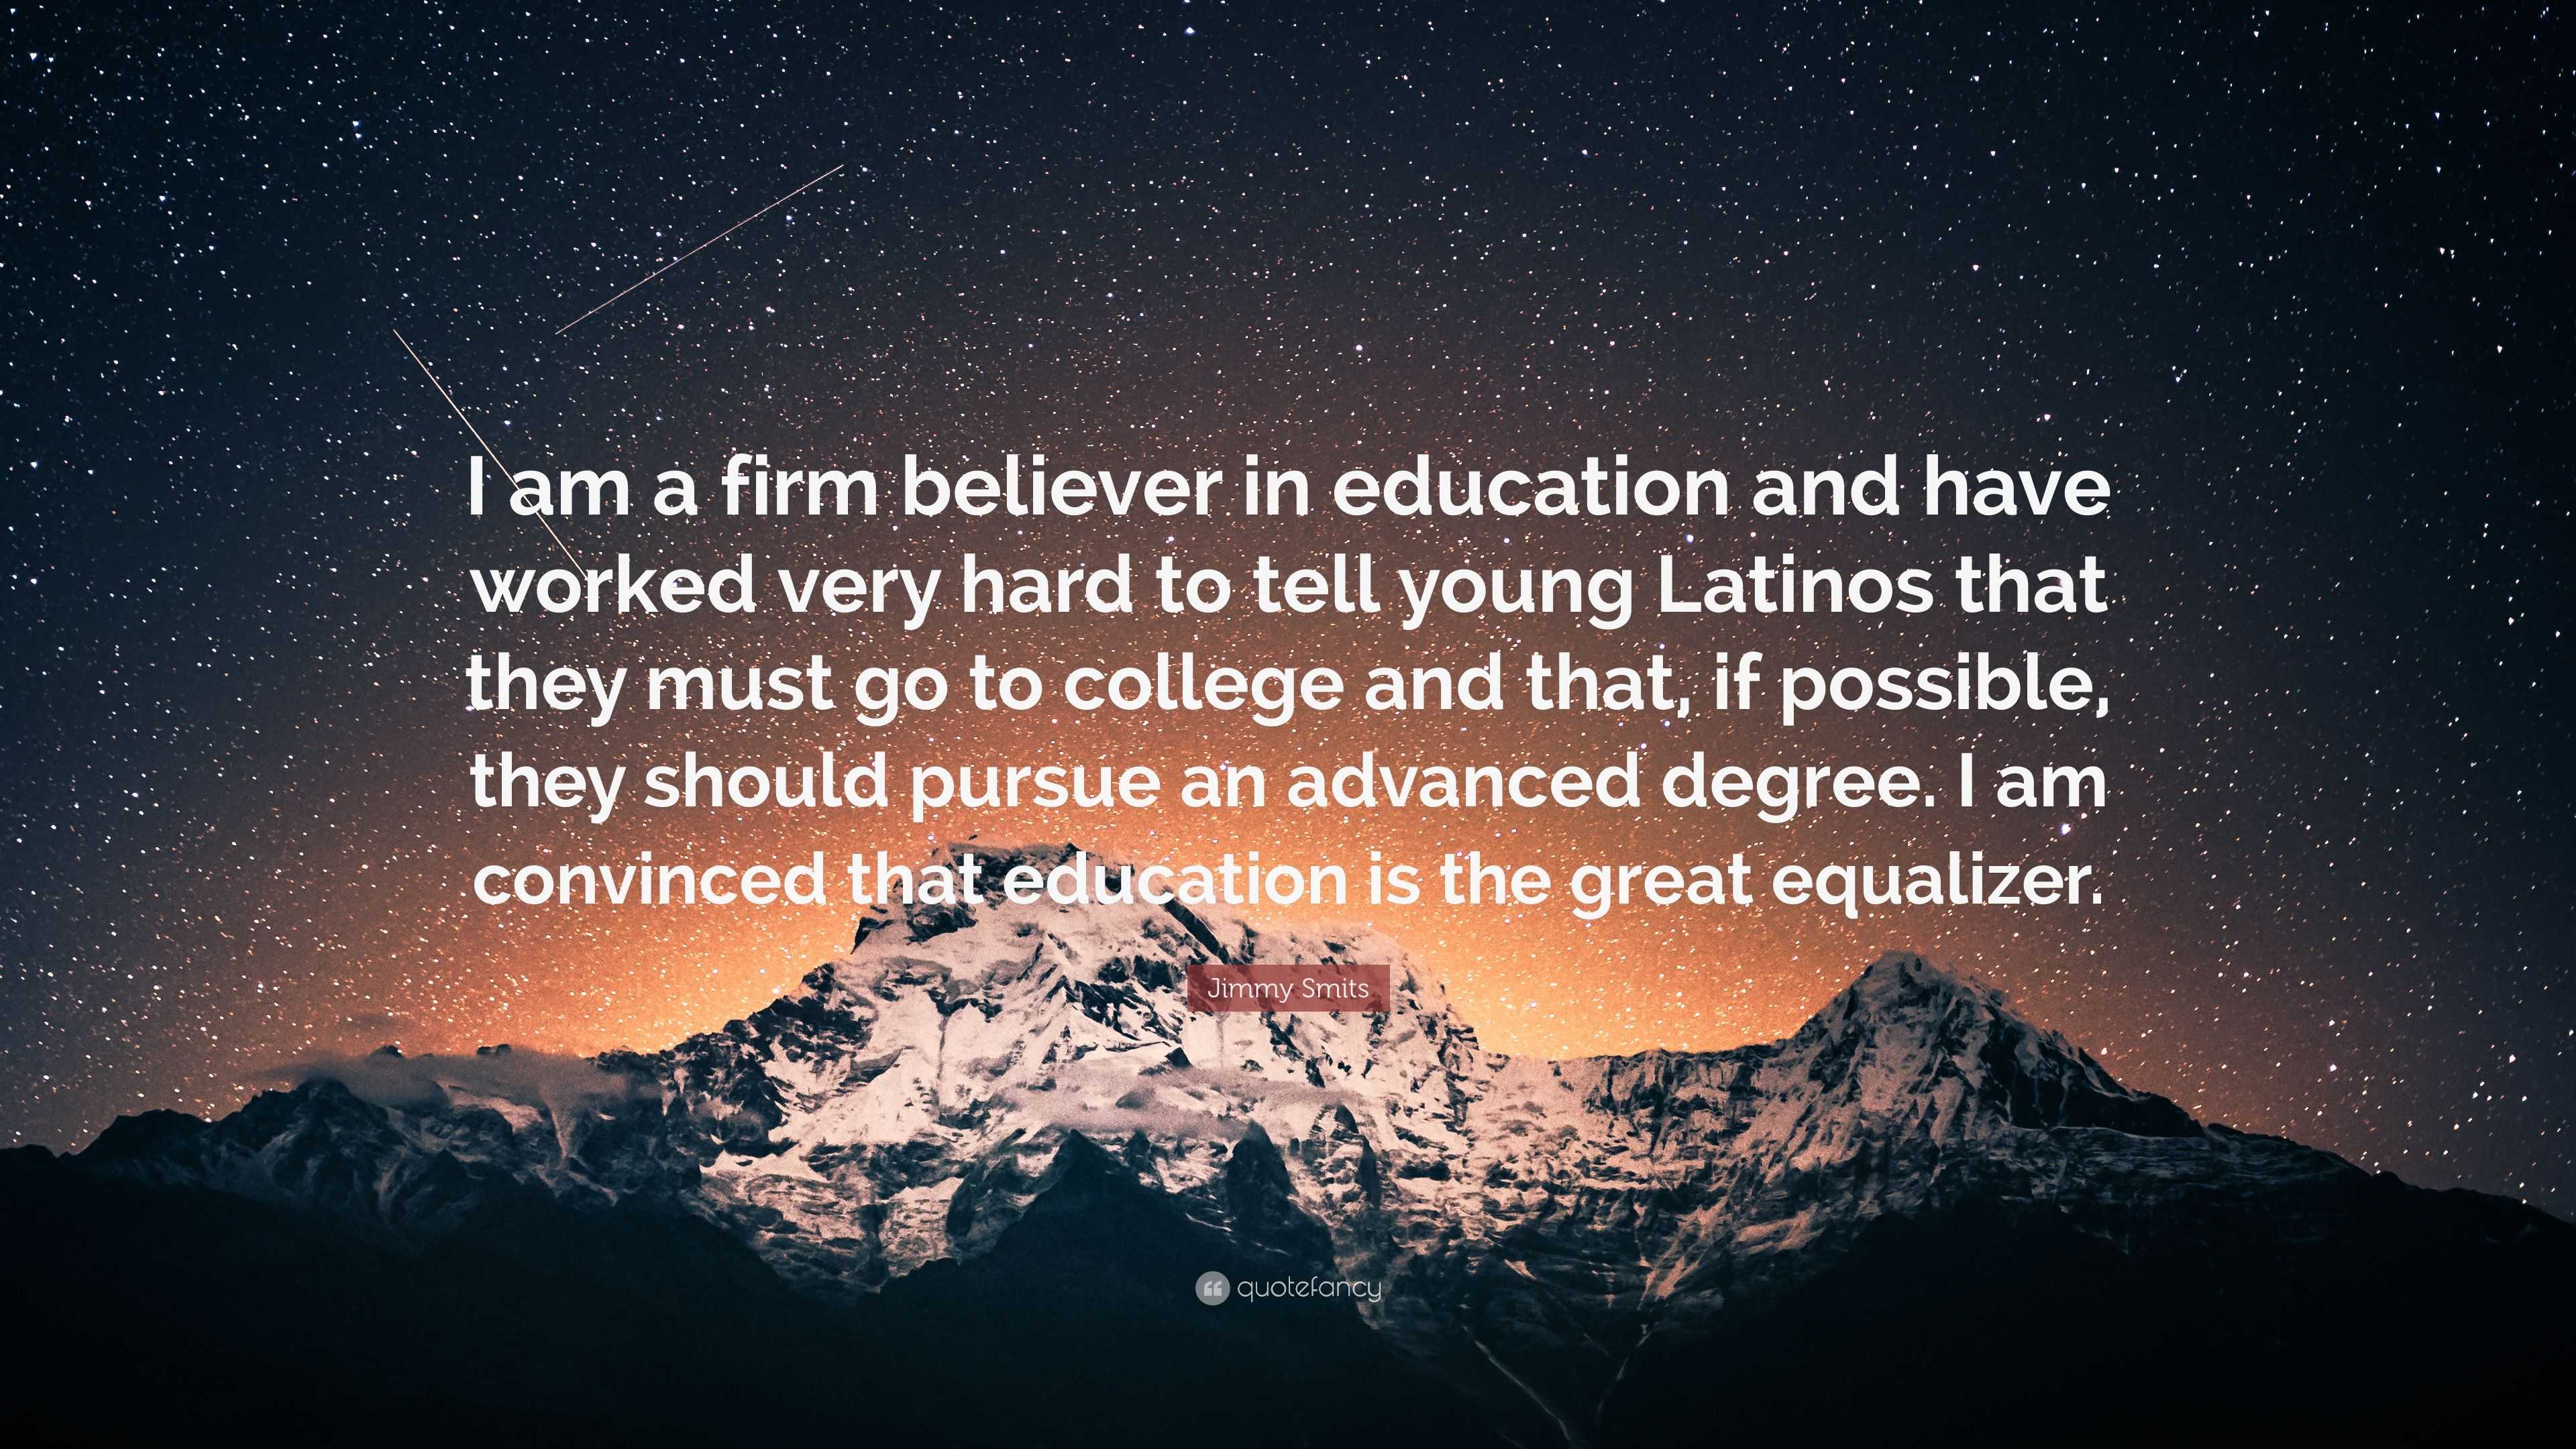 I am a firm believer in education and have - Quote